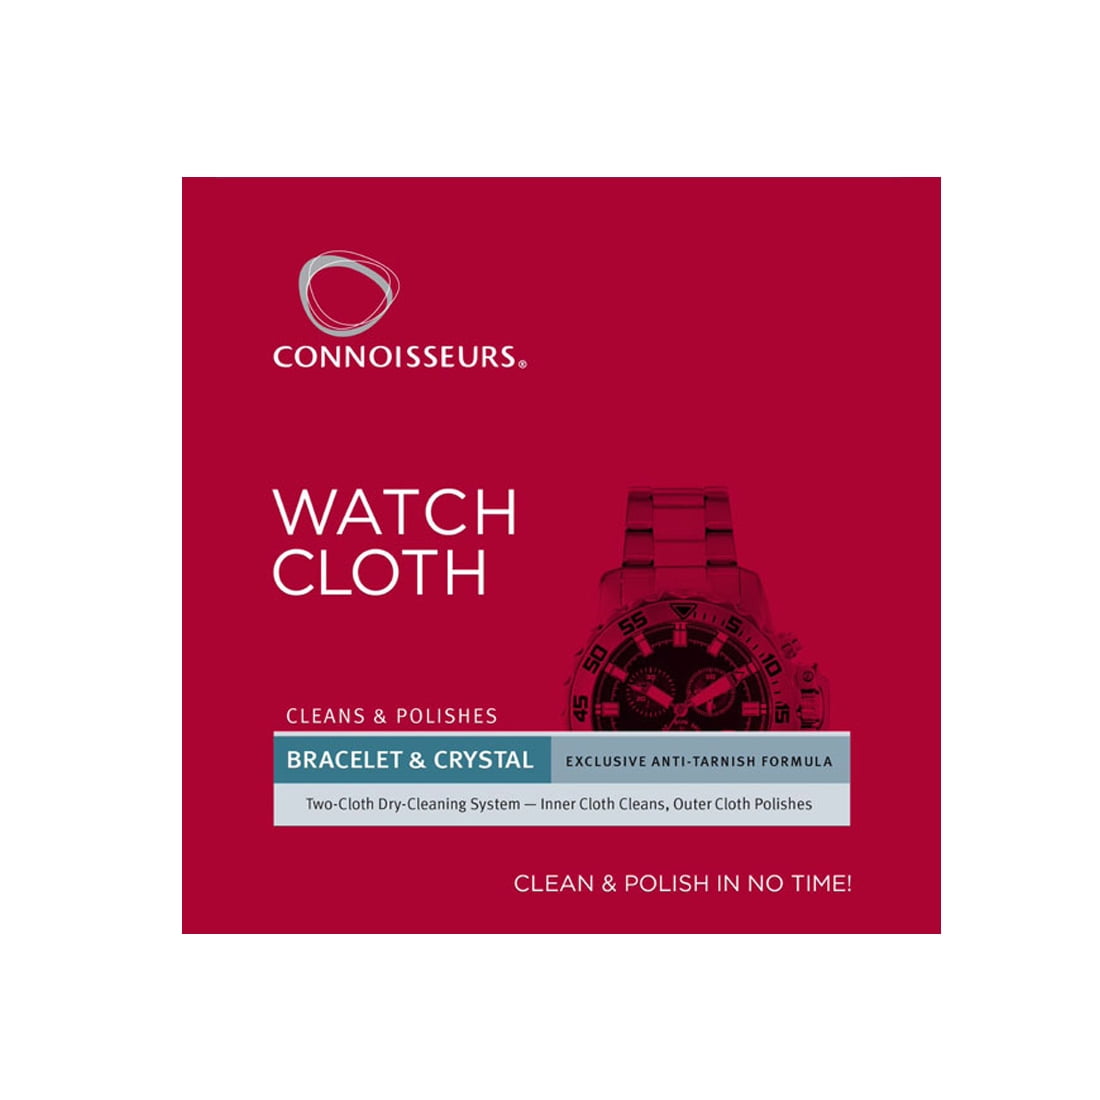 Connoisseurs Silver Wipes, 10 Ct